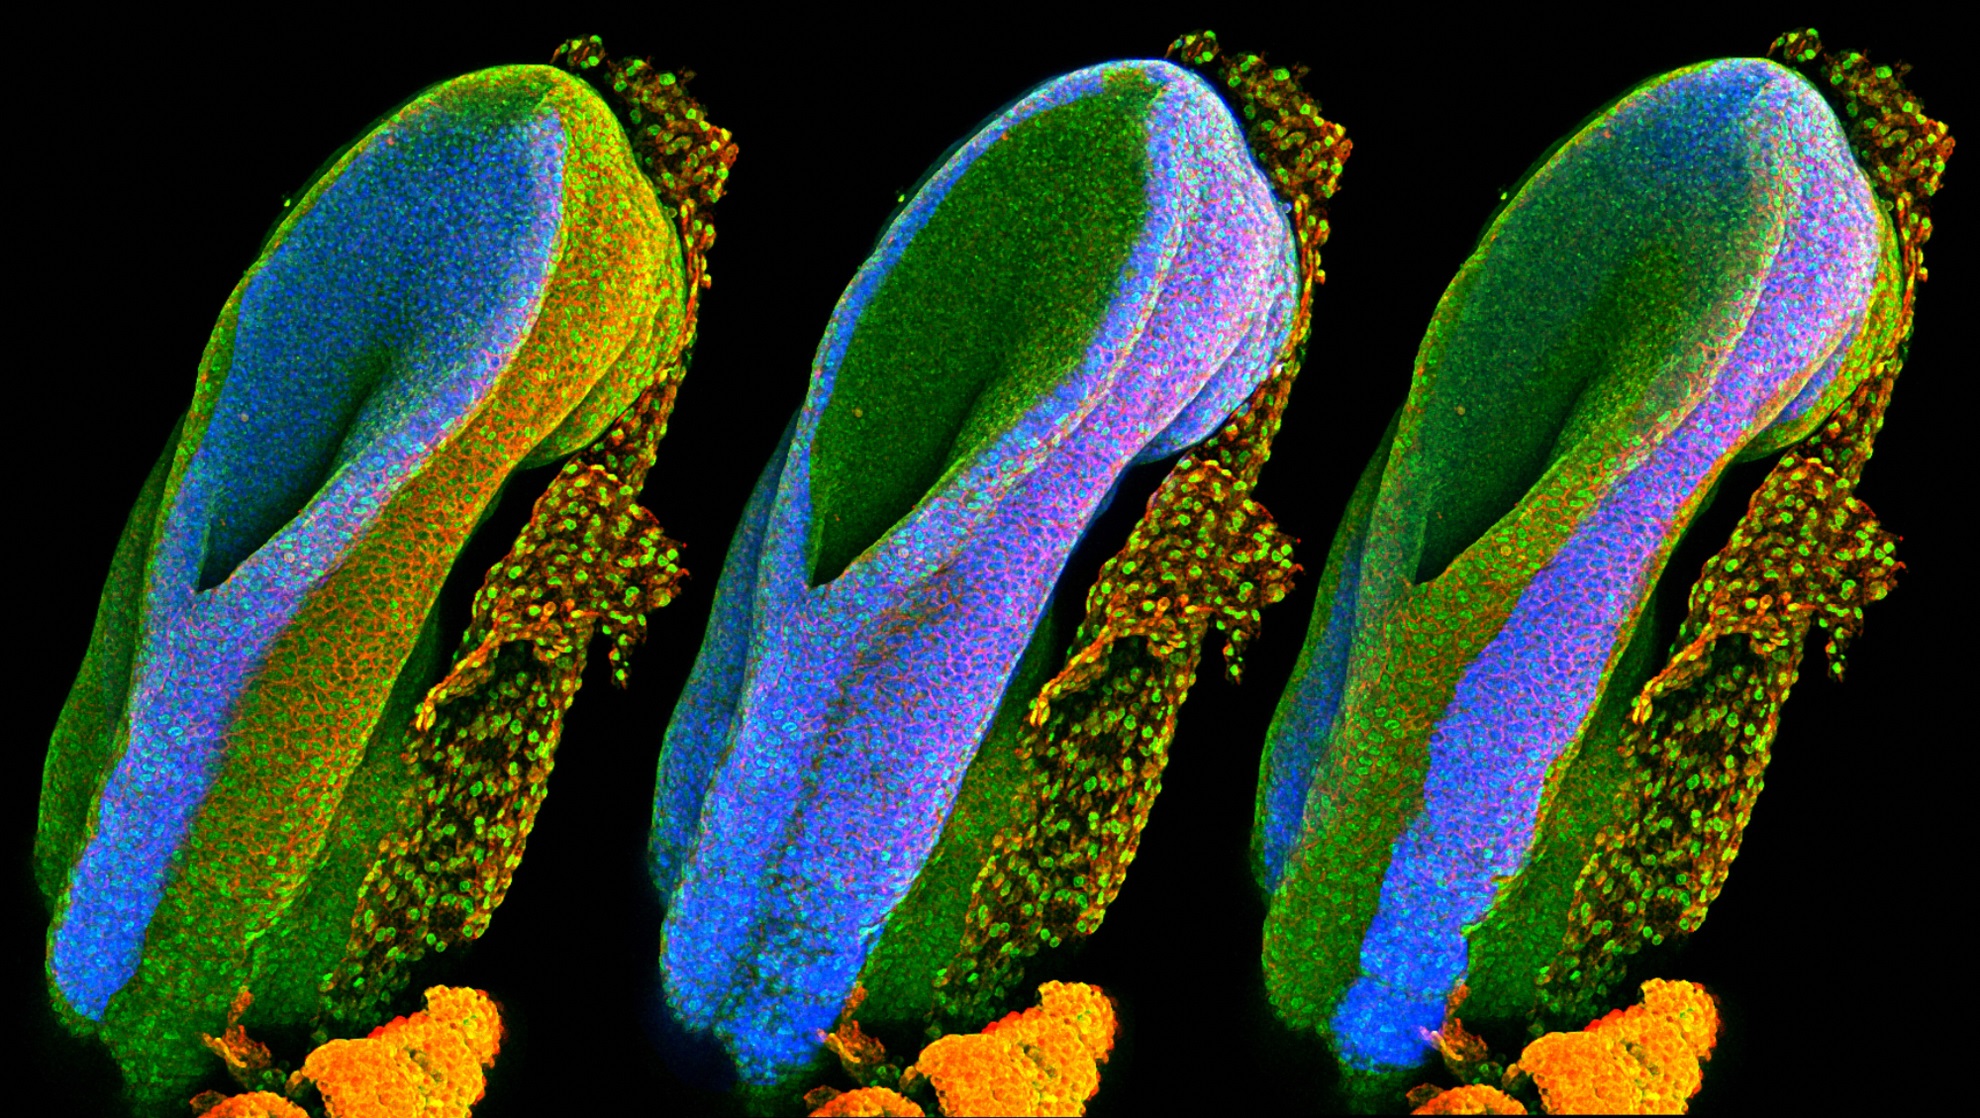 Our spines allow us to stand and move, and they protect the spinal cord, which connects all the nerves in our body with our brain. The spinal cord is formed from a structure called the neural tube, which develops during the first month of pregnancy. This series of three images shows the open end of a mouse’s neural tube, with each image highlighting (in blue) one of the three main embryonic tissue types. On the left is the neural tube itself, which develops into the brain, spine and nerves. On the right is the surface ectoderm – the word ‘ectoderm’ comes from the Greek ektos meaning ‘outside’ and derma meaning skin – which will eventually form the skin, teeth and hair. The middle image shows the mesoderm (also from Greek, meaning ‘middle skin’), which will form the organs.